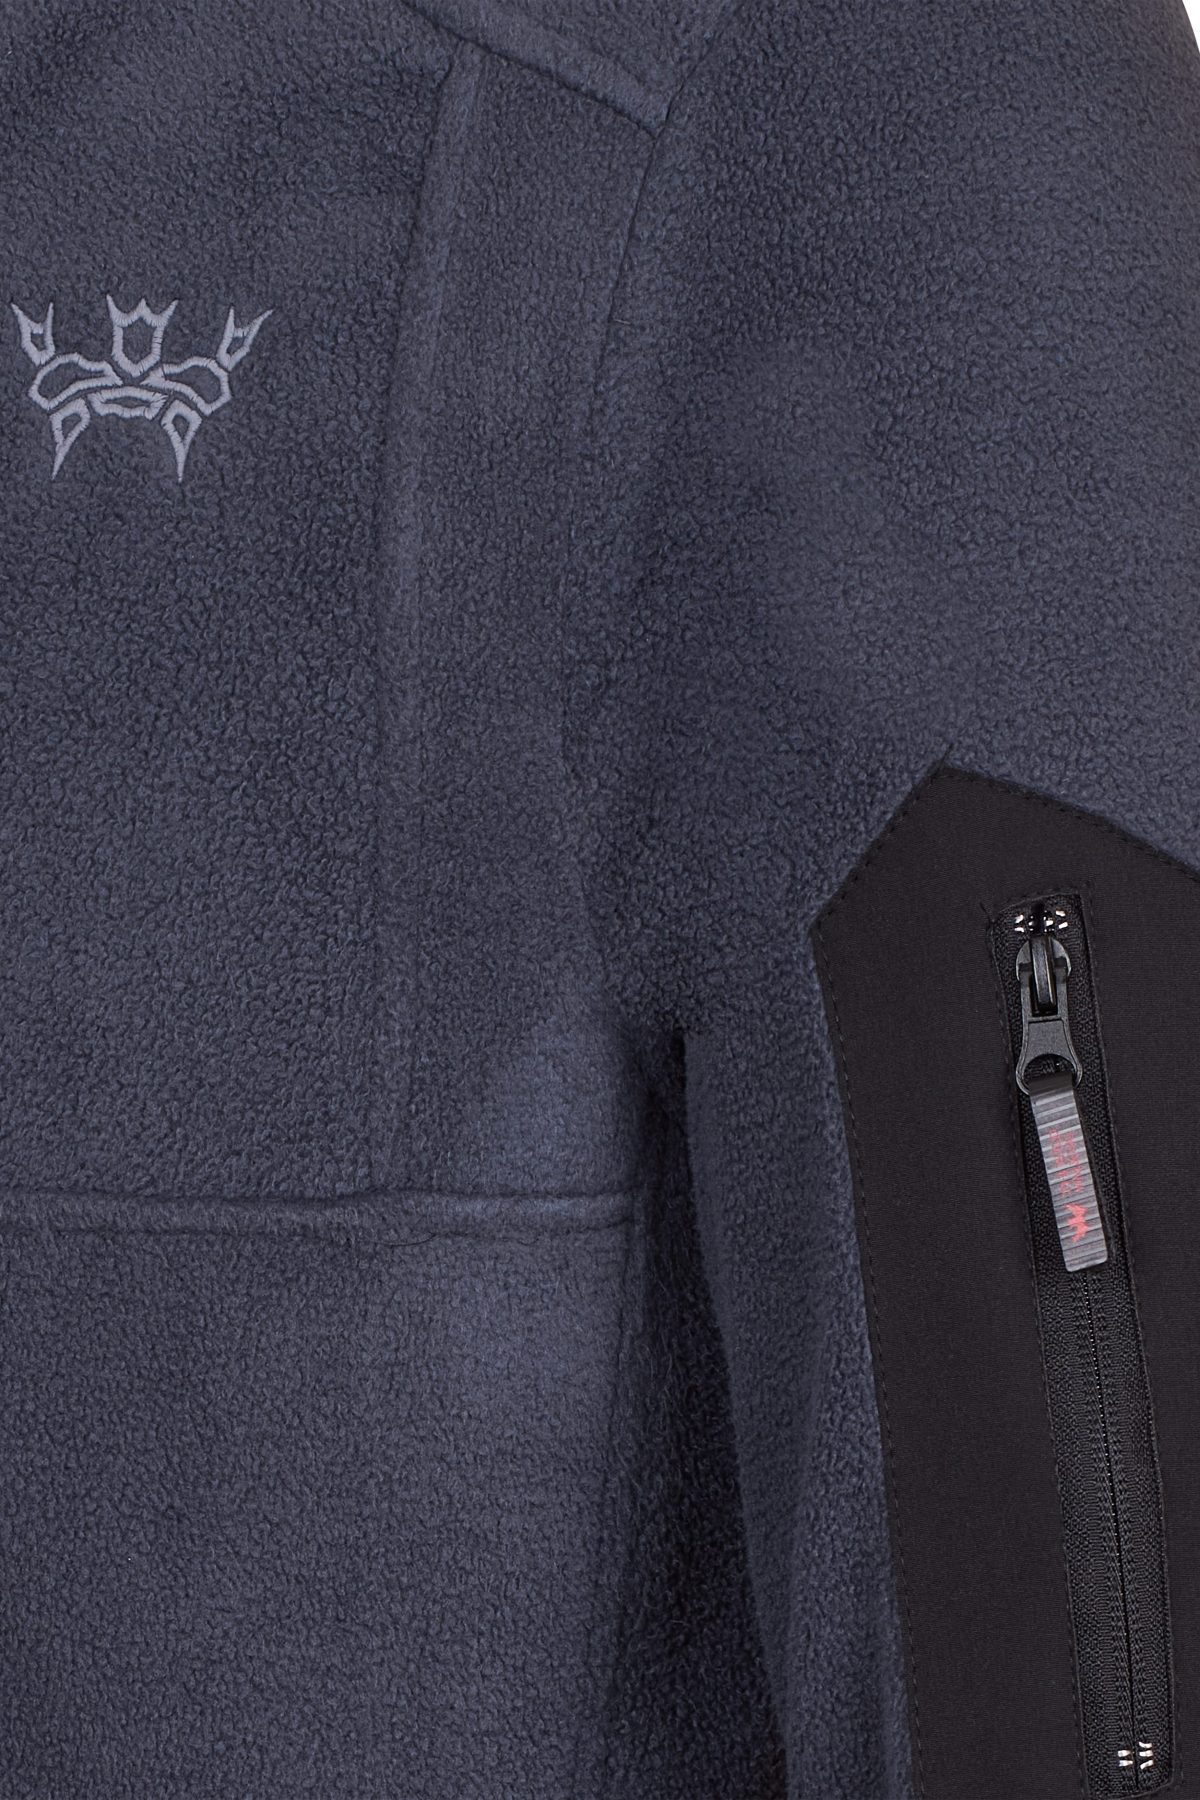 Stylish Fleece with Embroidered Logo and Sleeve Pocket – Anthracite-3467